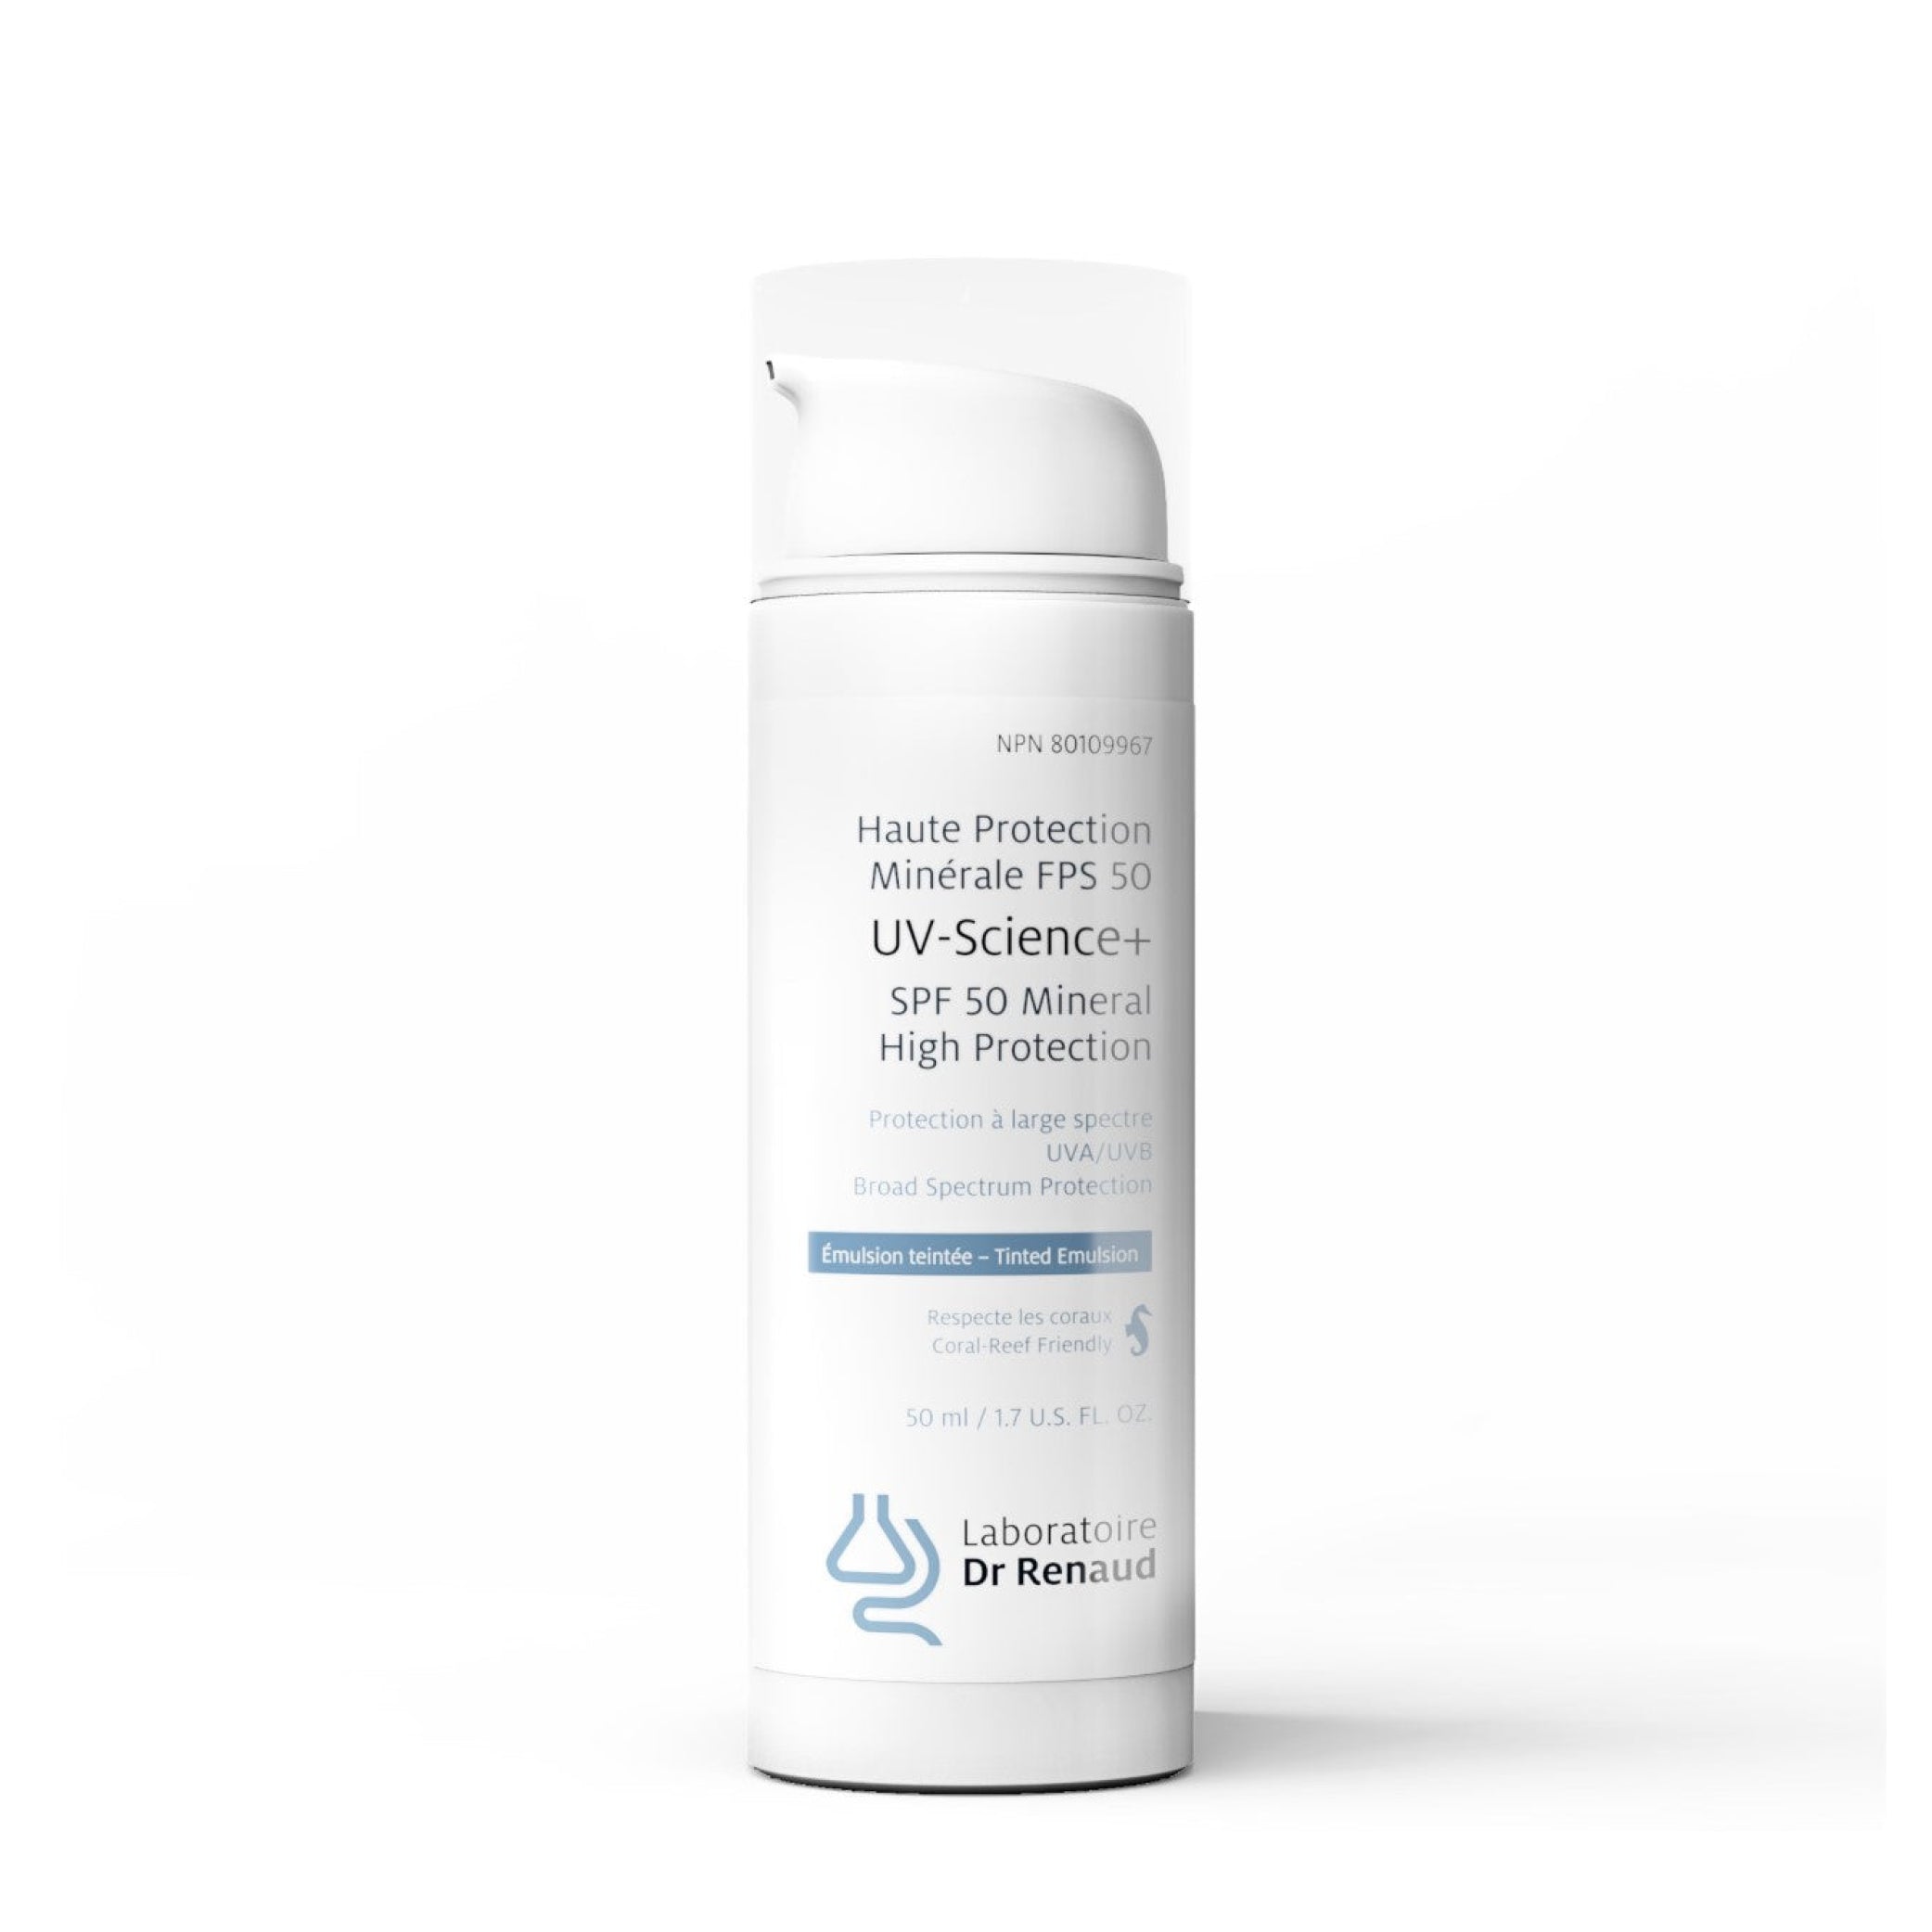 UV-Science+ SPF 50 Mineral High Protection